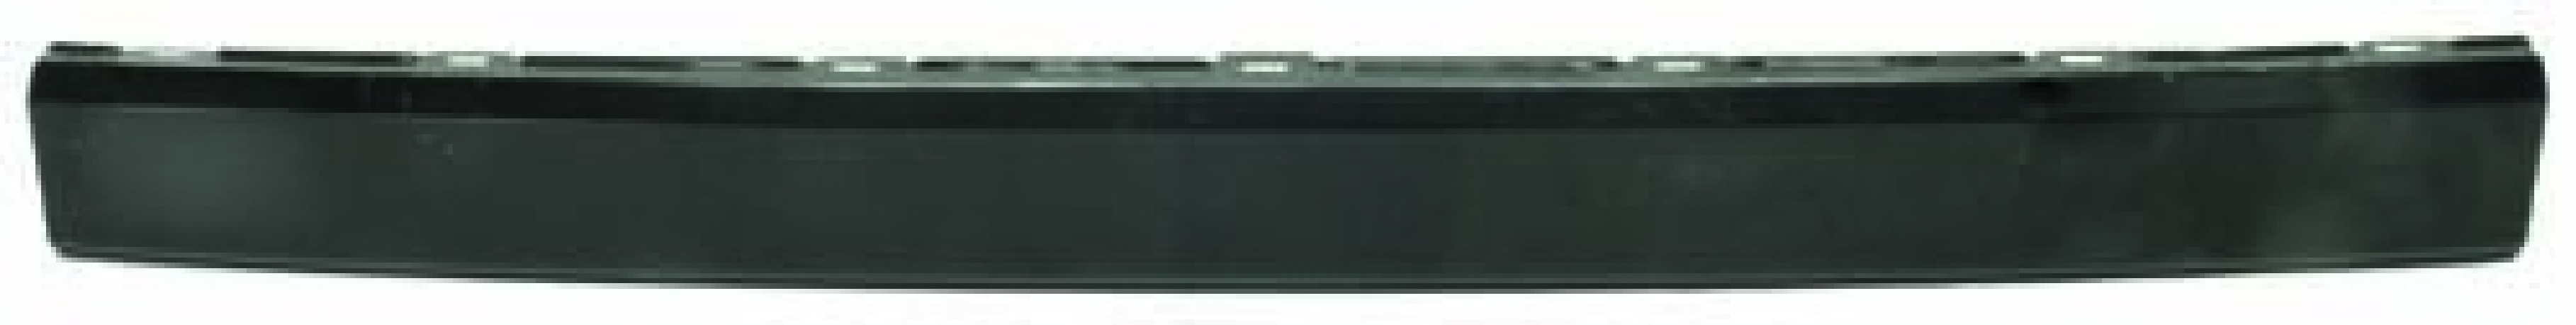 Lower Front Grille Panel, Short Nose, T4 09/90-08/94